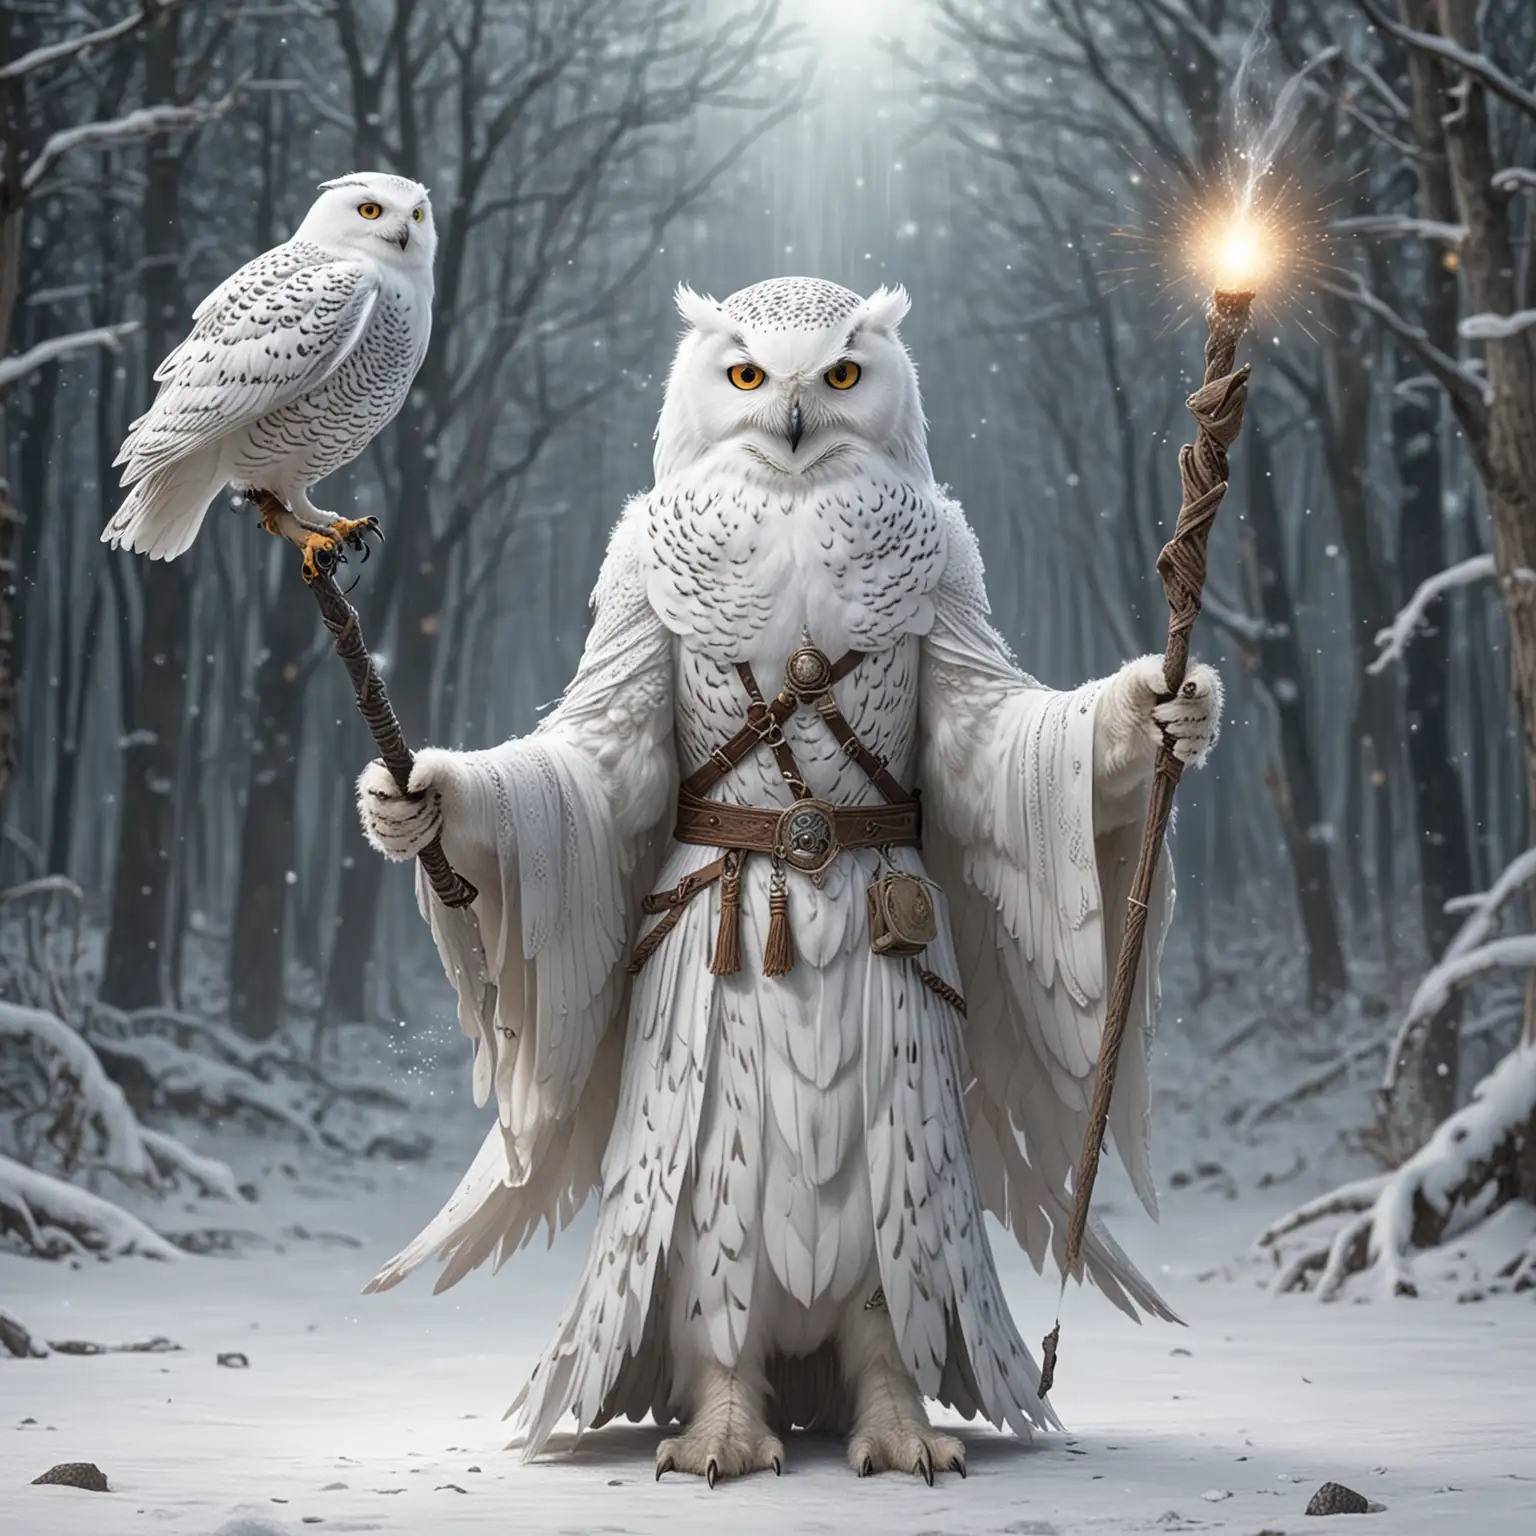 wingless anthropomorphic female snowy owl wizard, pointing a staff, producing energy blast